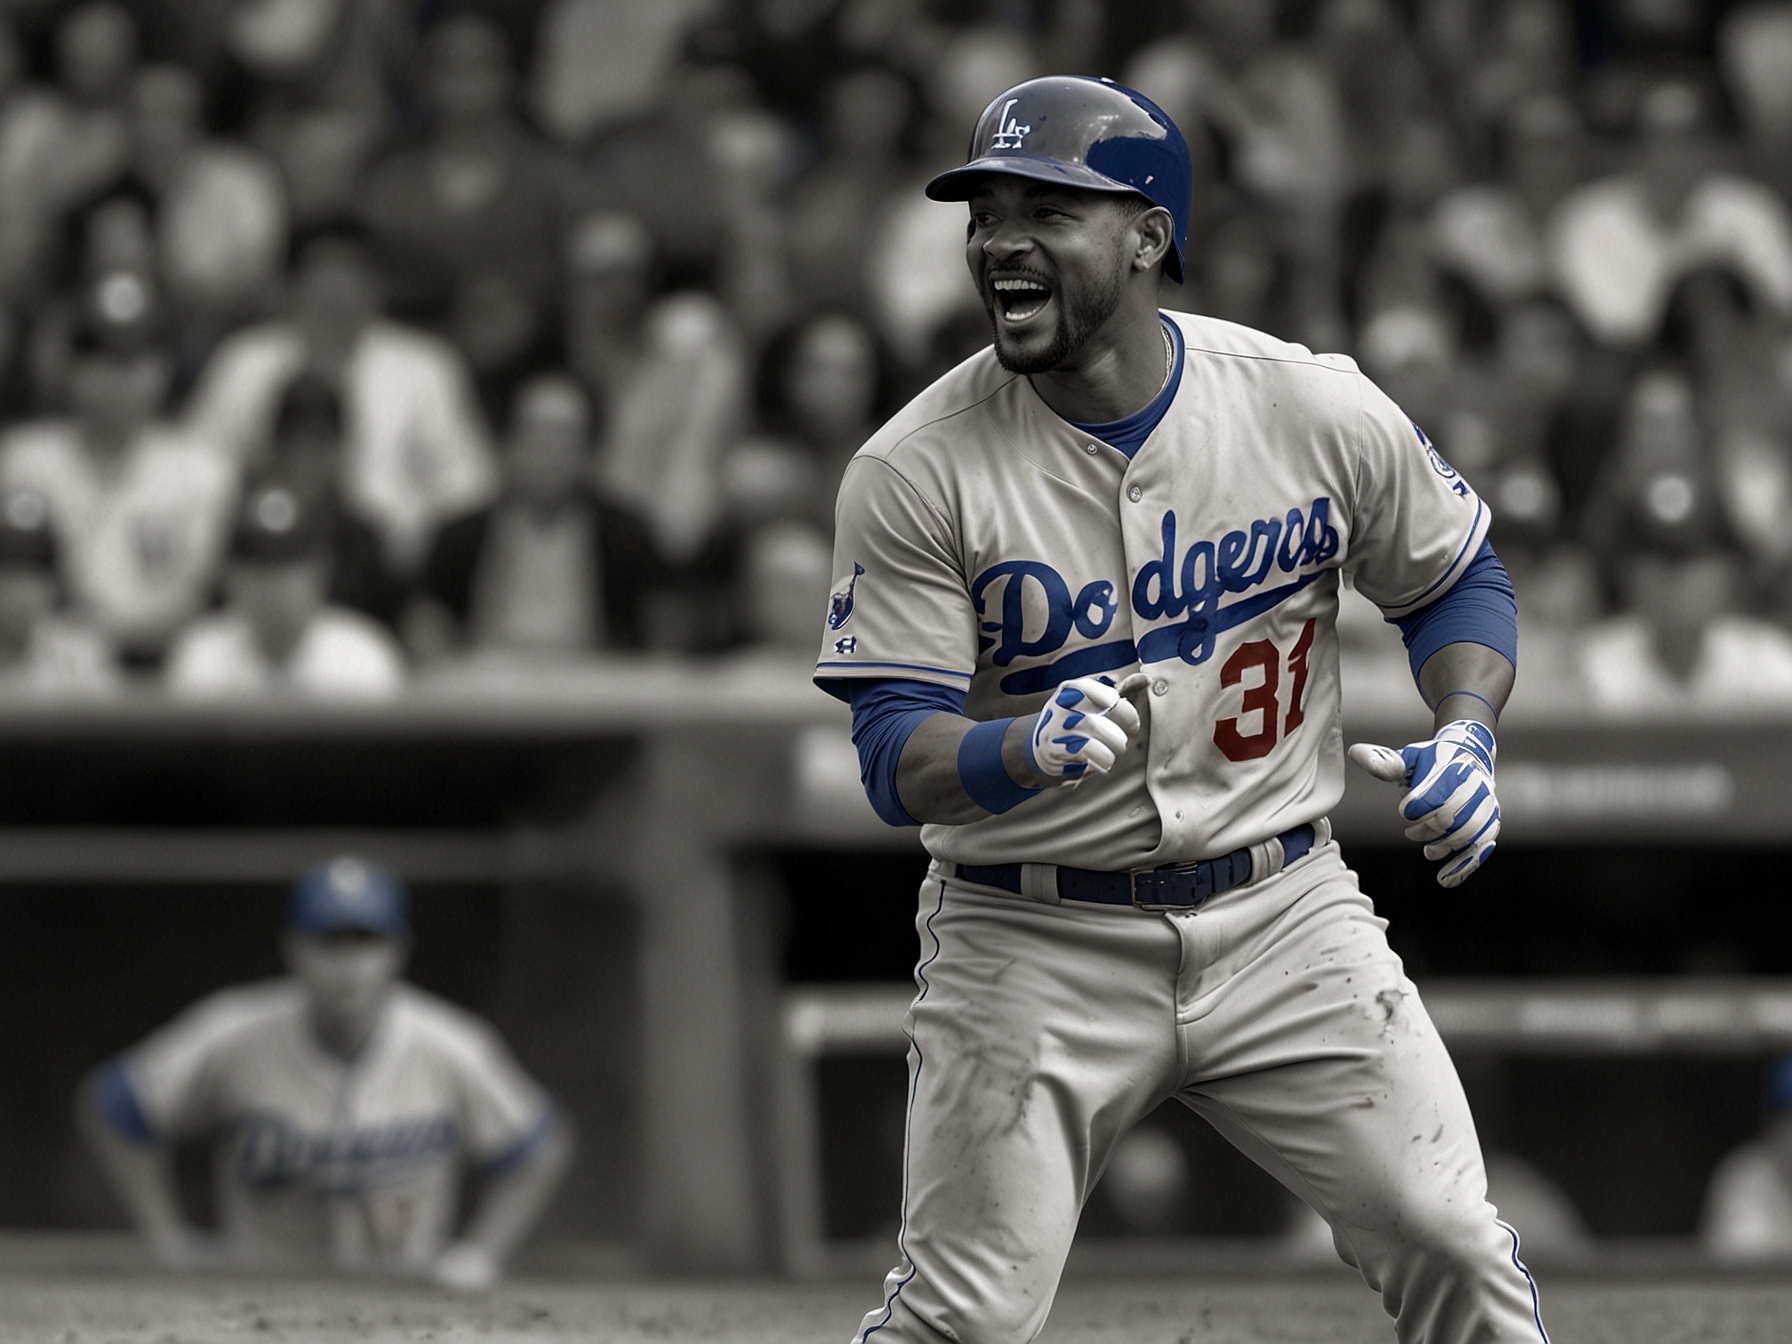 Will Smith of the Los Angeles Dodgers connects with a pitch, hitting a crucial double in the 11th inning that broke the tie and initiated a seven-run rally against the San Francisco Giants.